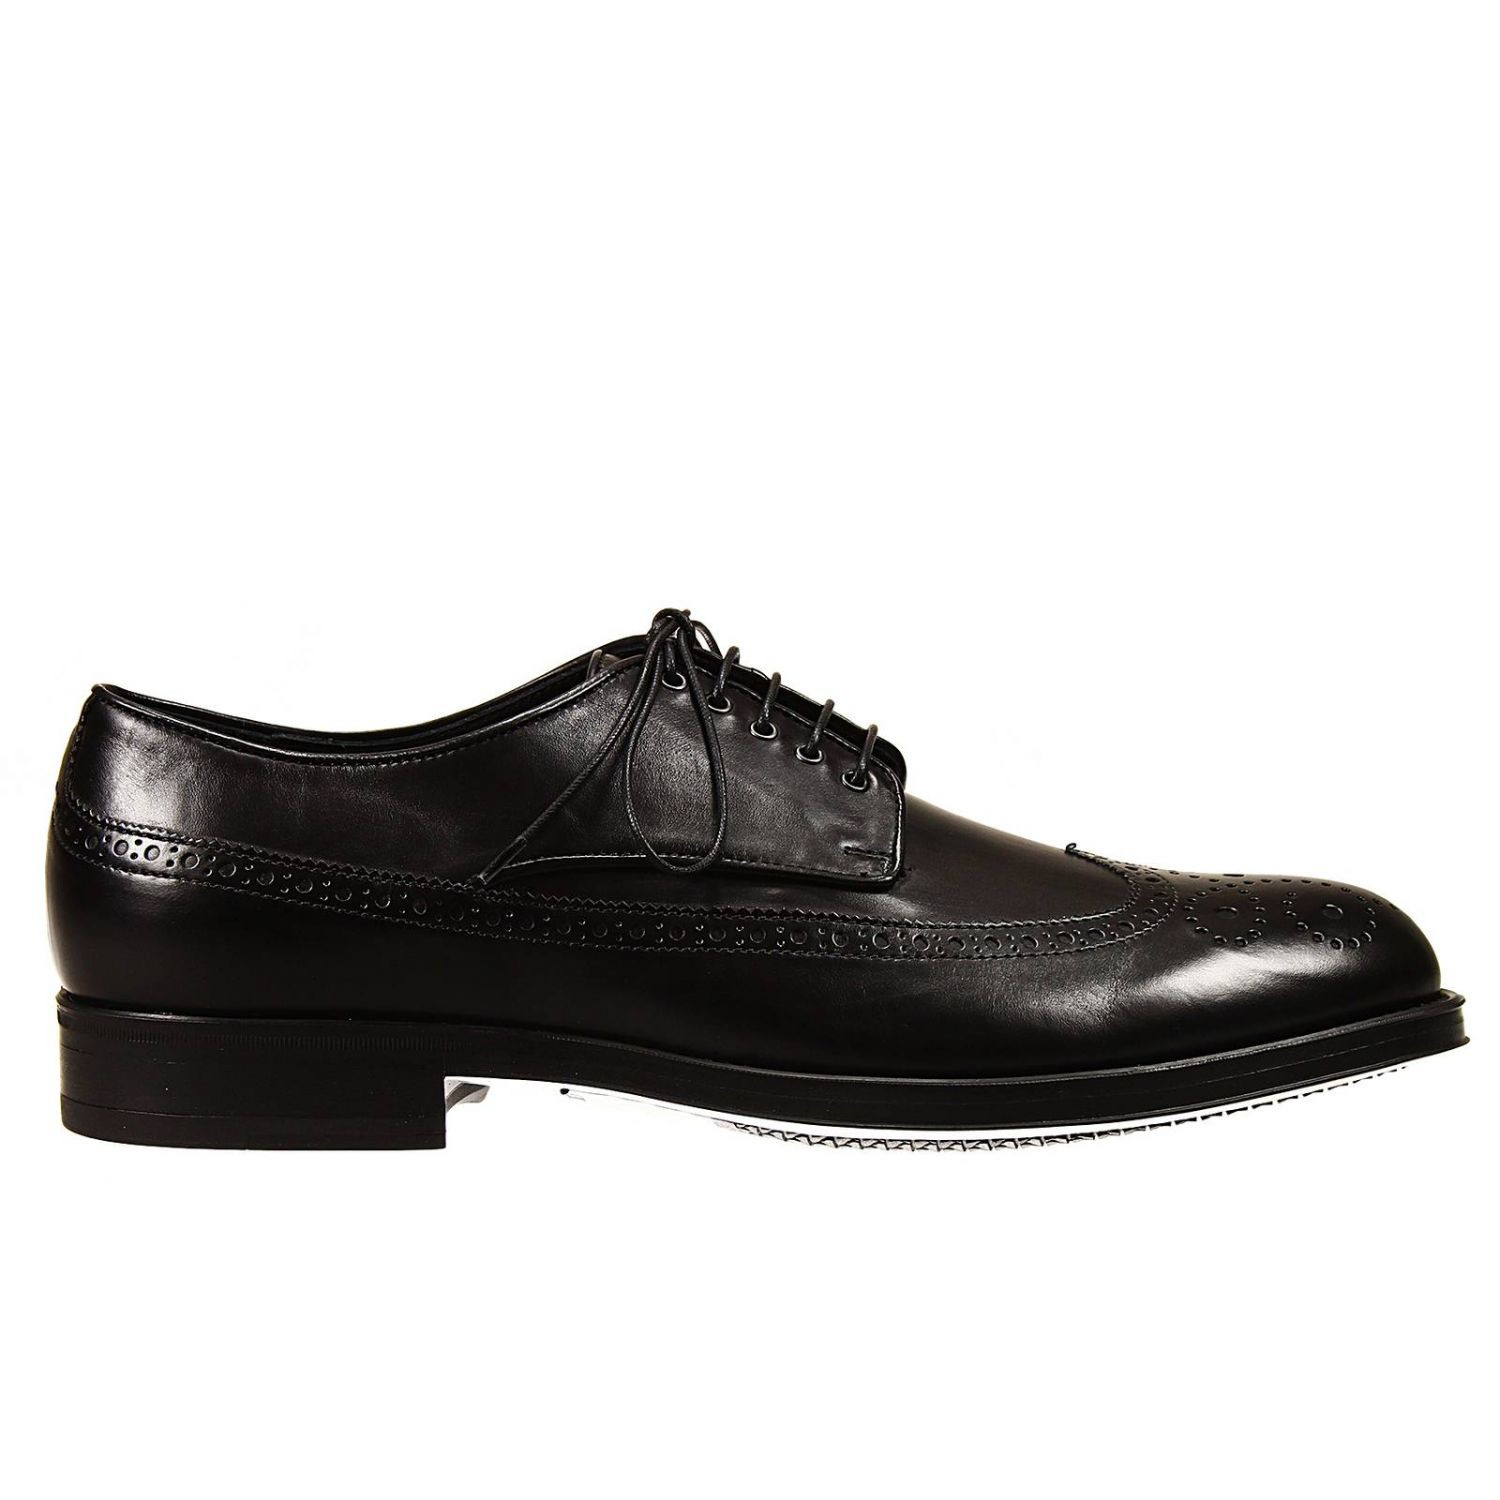 Alberto guardiani Lace Up Shoes Vega Derby Wingtip Leather Sole in ...